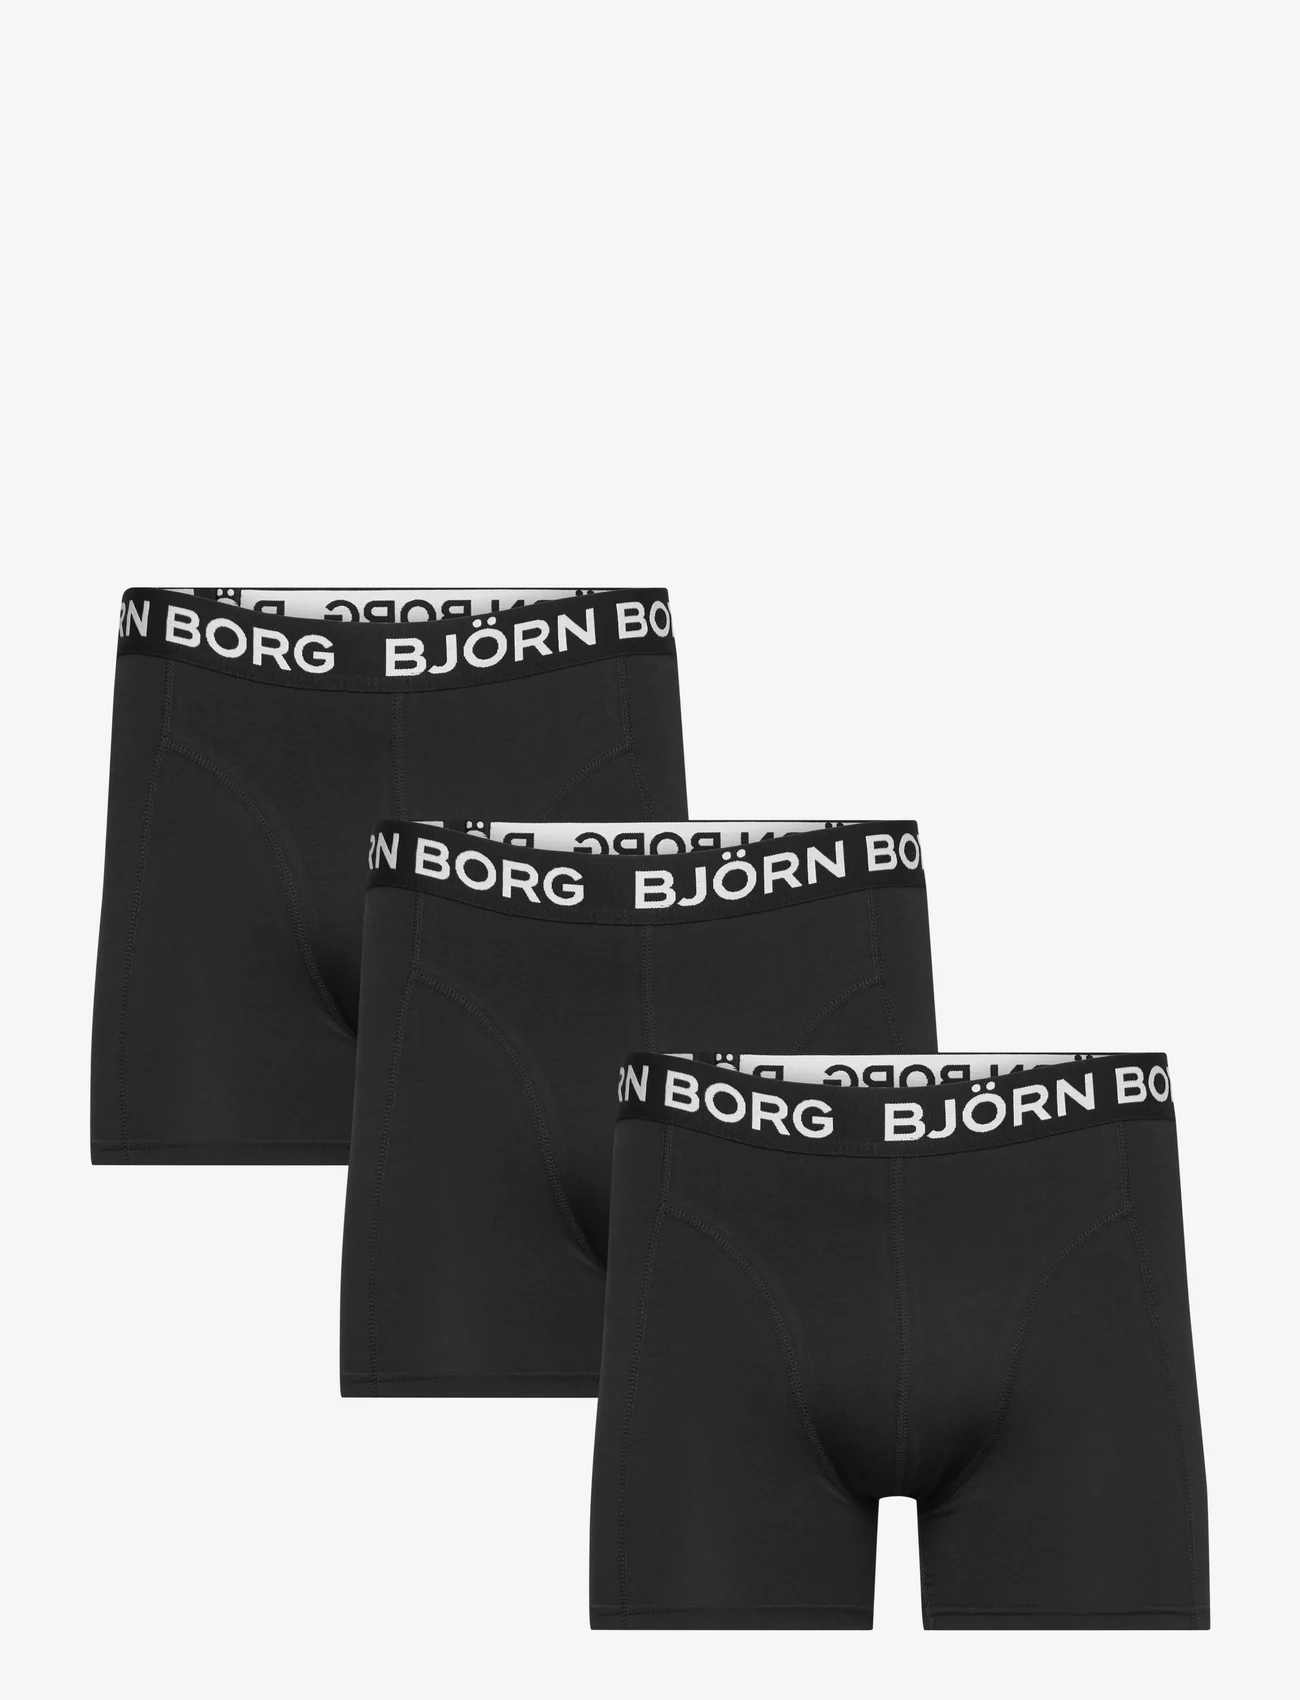 Björn Borg - COTTON STRETCH BOXER 3p - nordic style - multipack 1 - 0